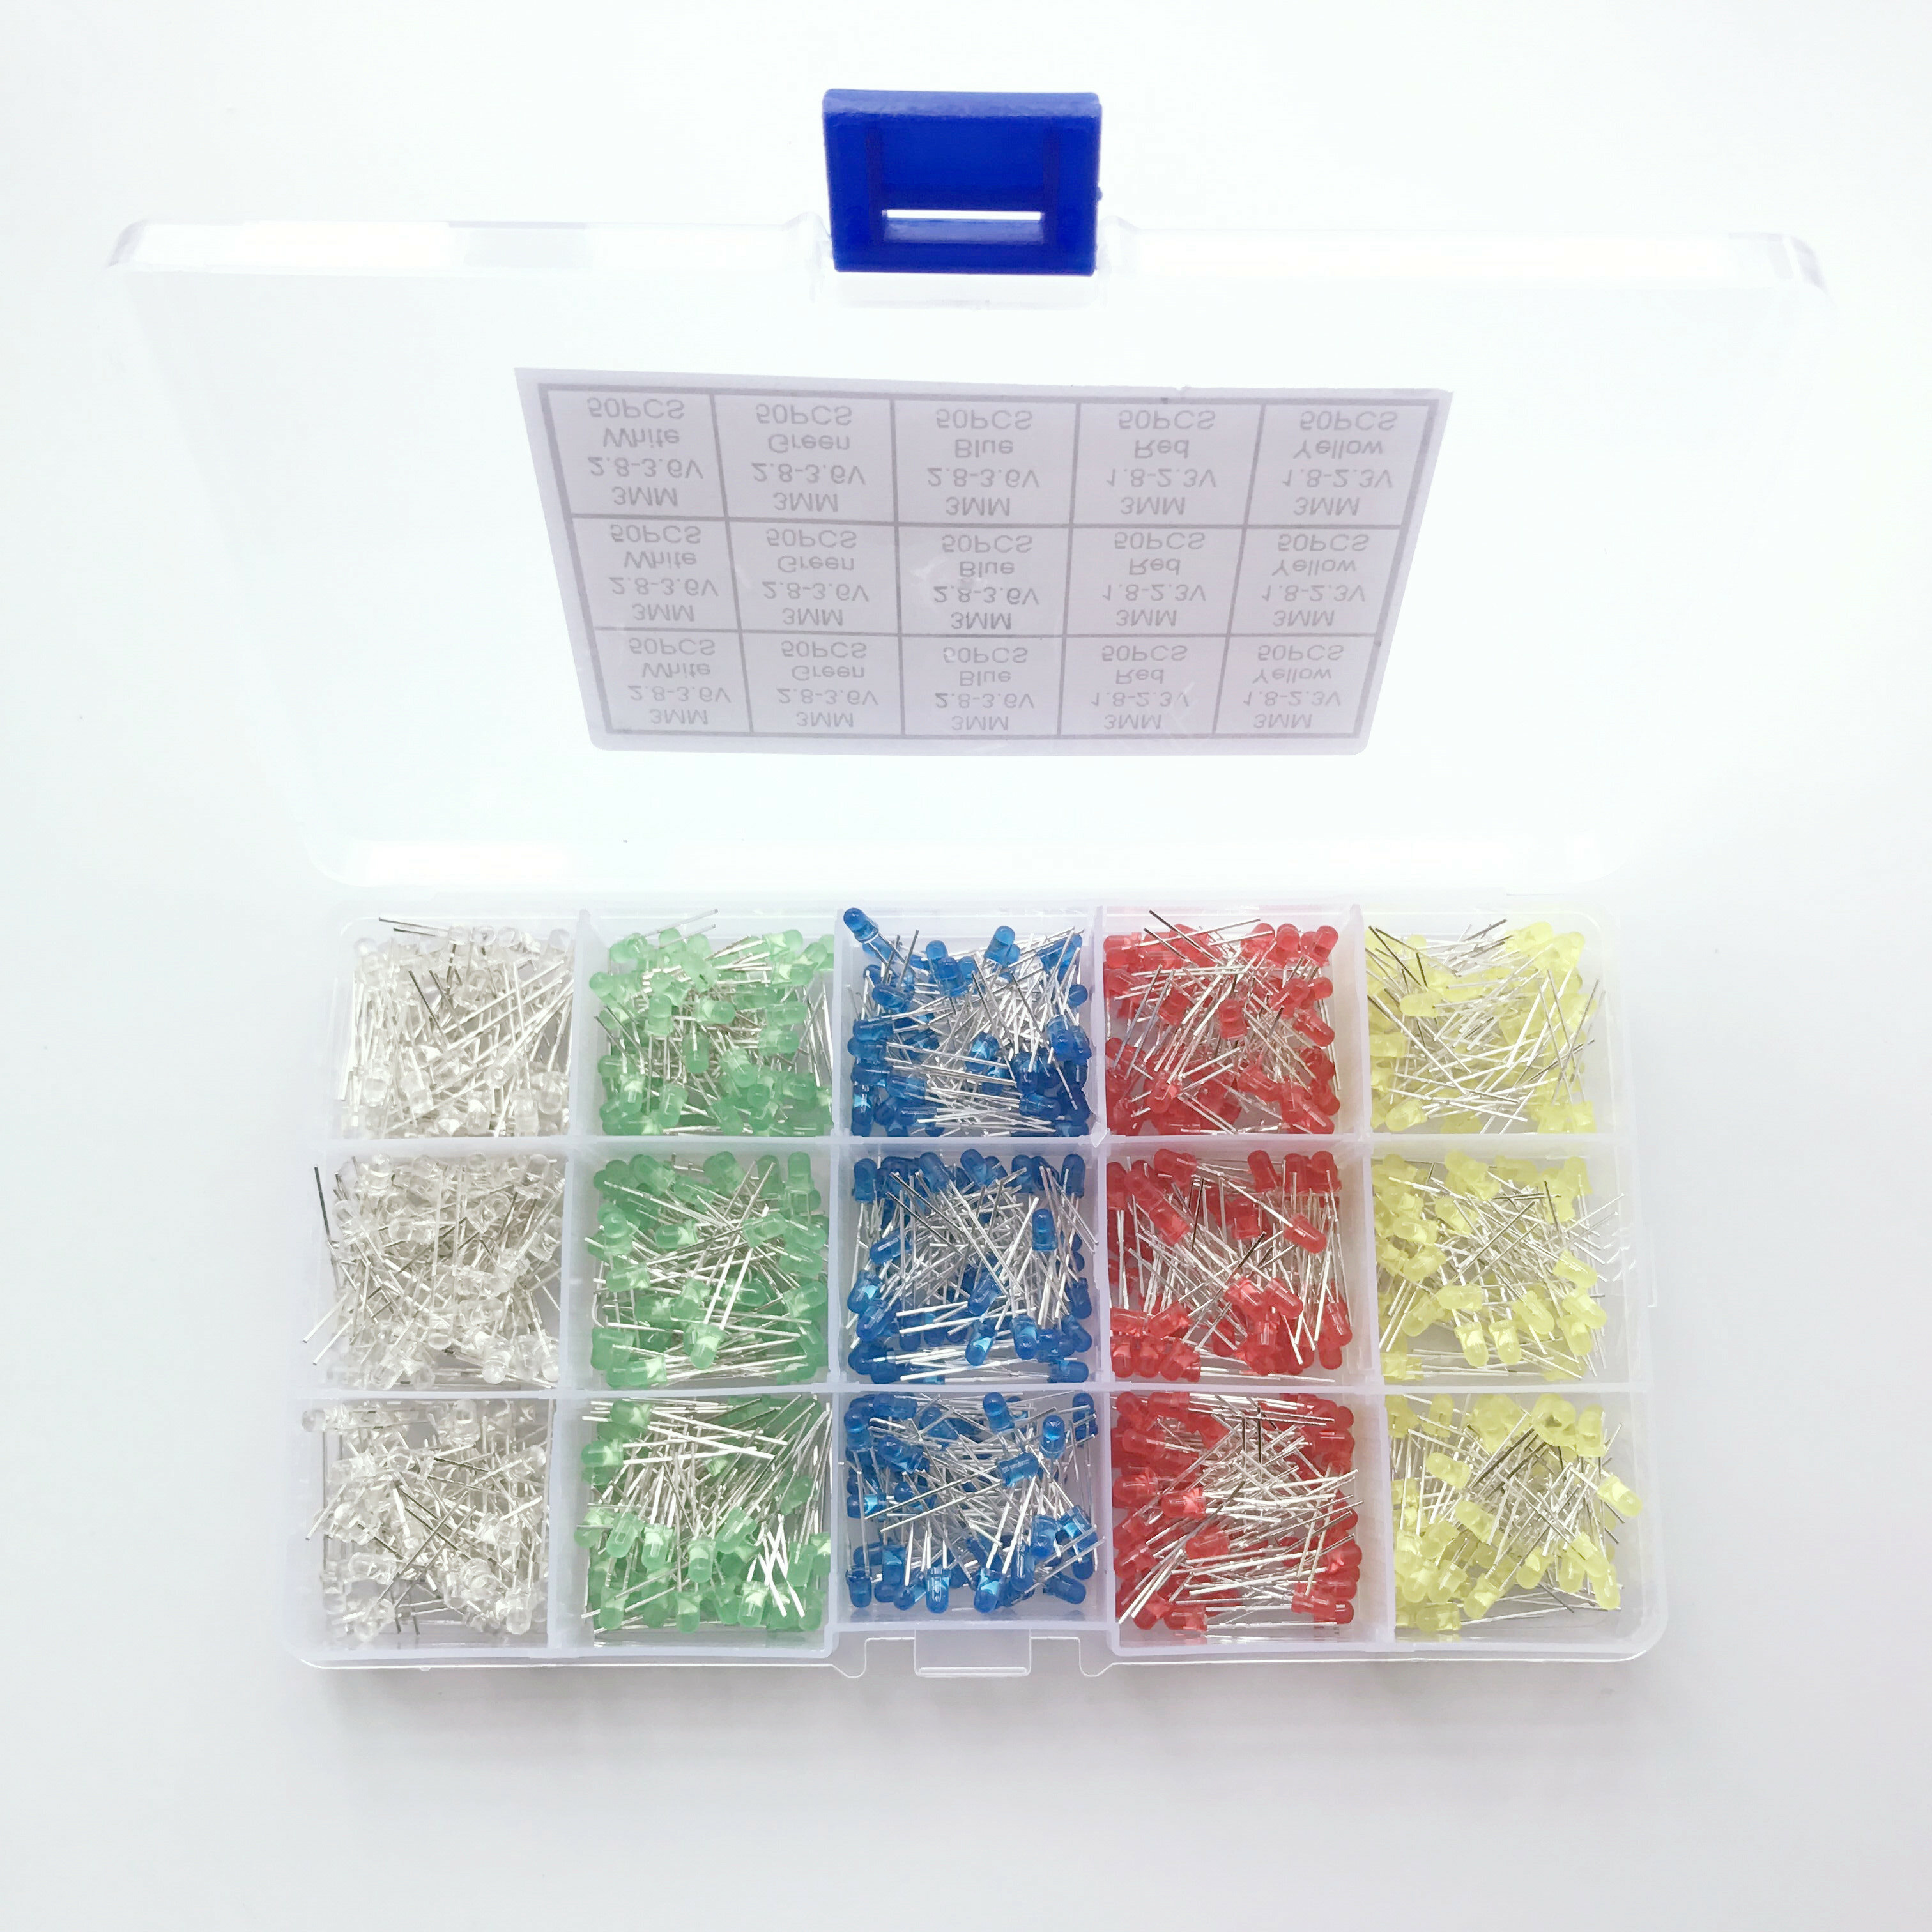 1000pcs 3MM LED Diode Red Yellow Blue Green White Each 200pcs with Plastic Box